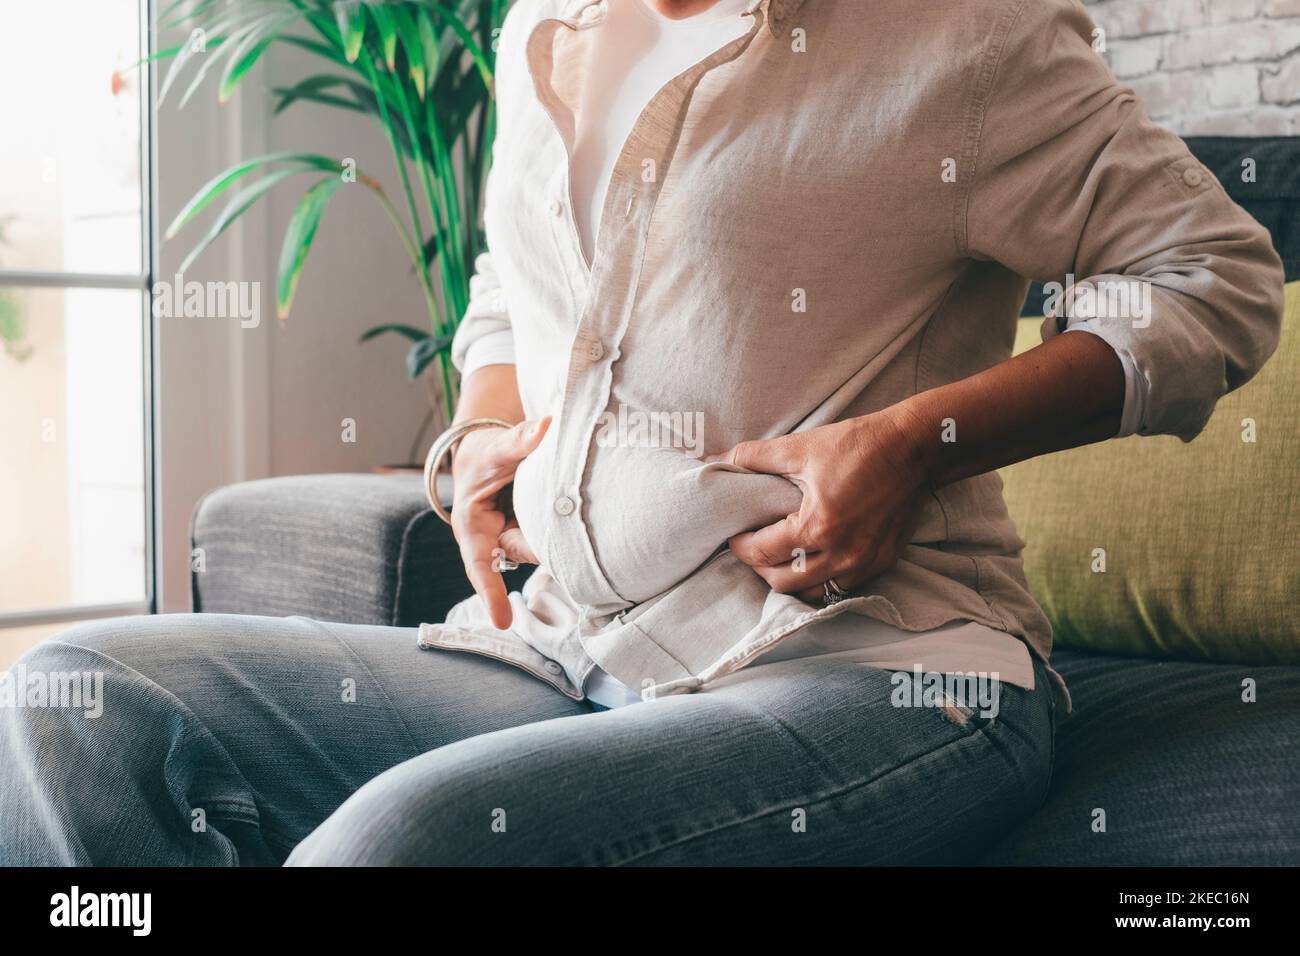 Midsection of woman hands holding her belly fat sitting on sofa at home. Caucasian lady grabbing excessive fat on her abdomen. Young female pinching on her fatty obese waist Stock Photo